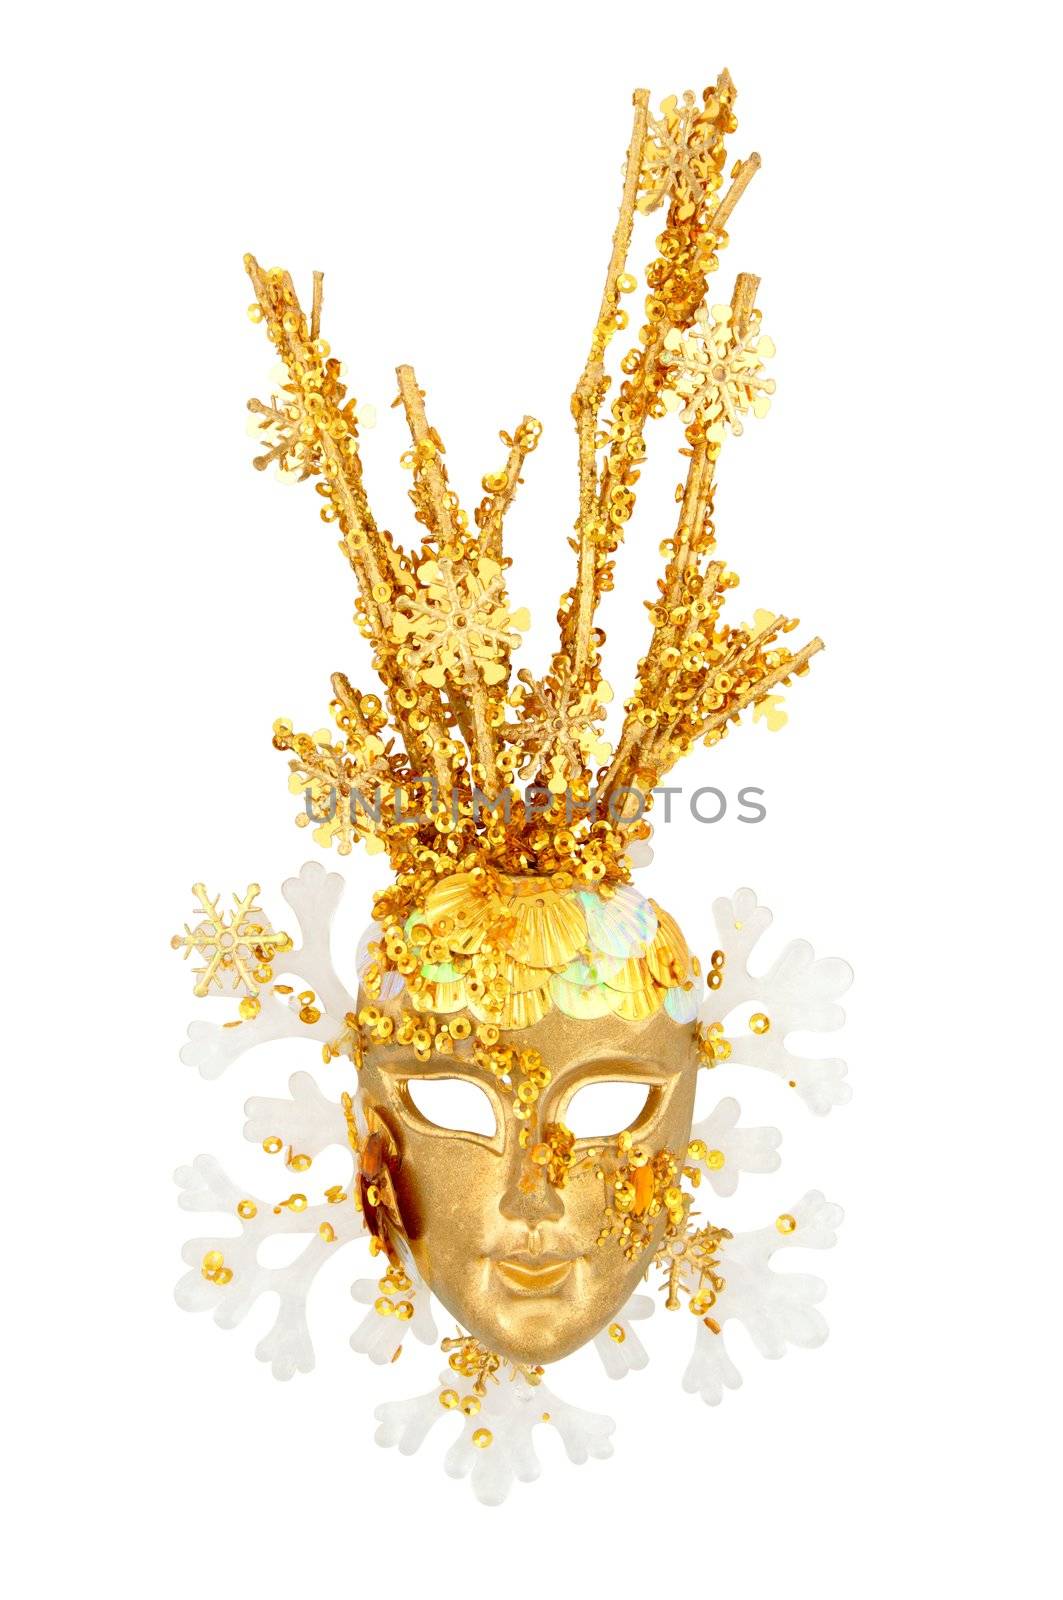 Isolated decorative mask by dyoma